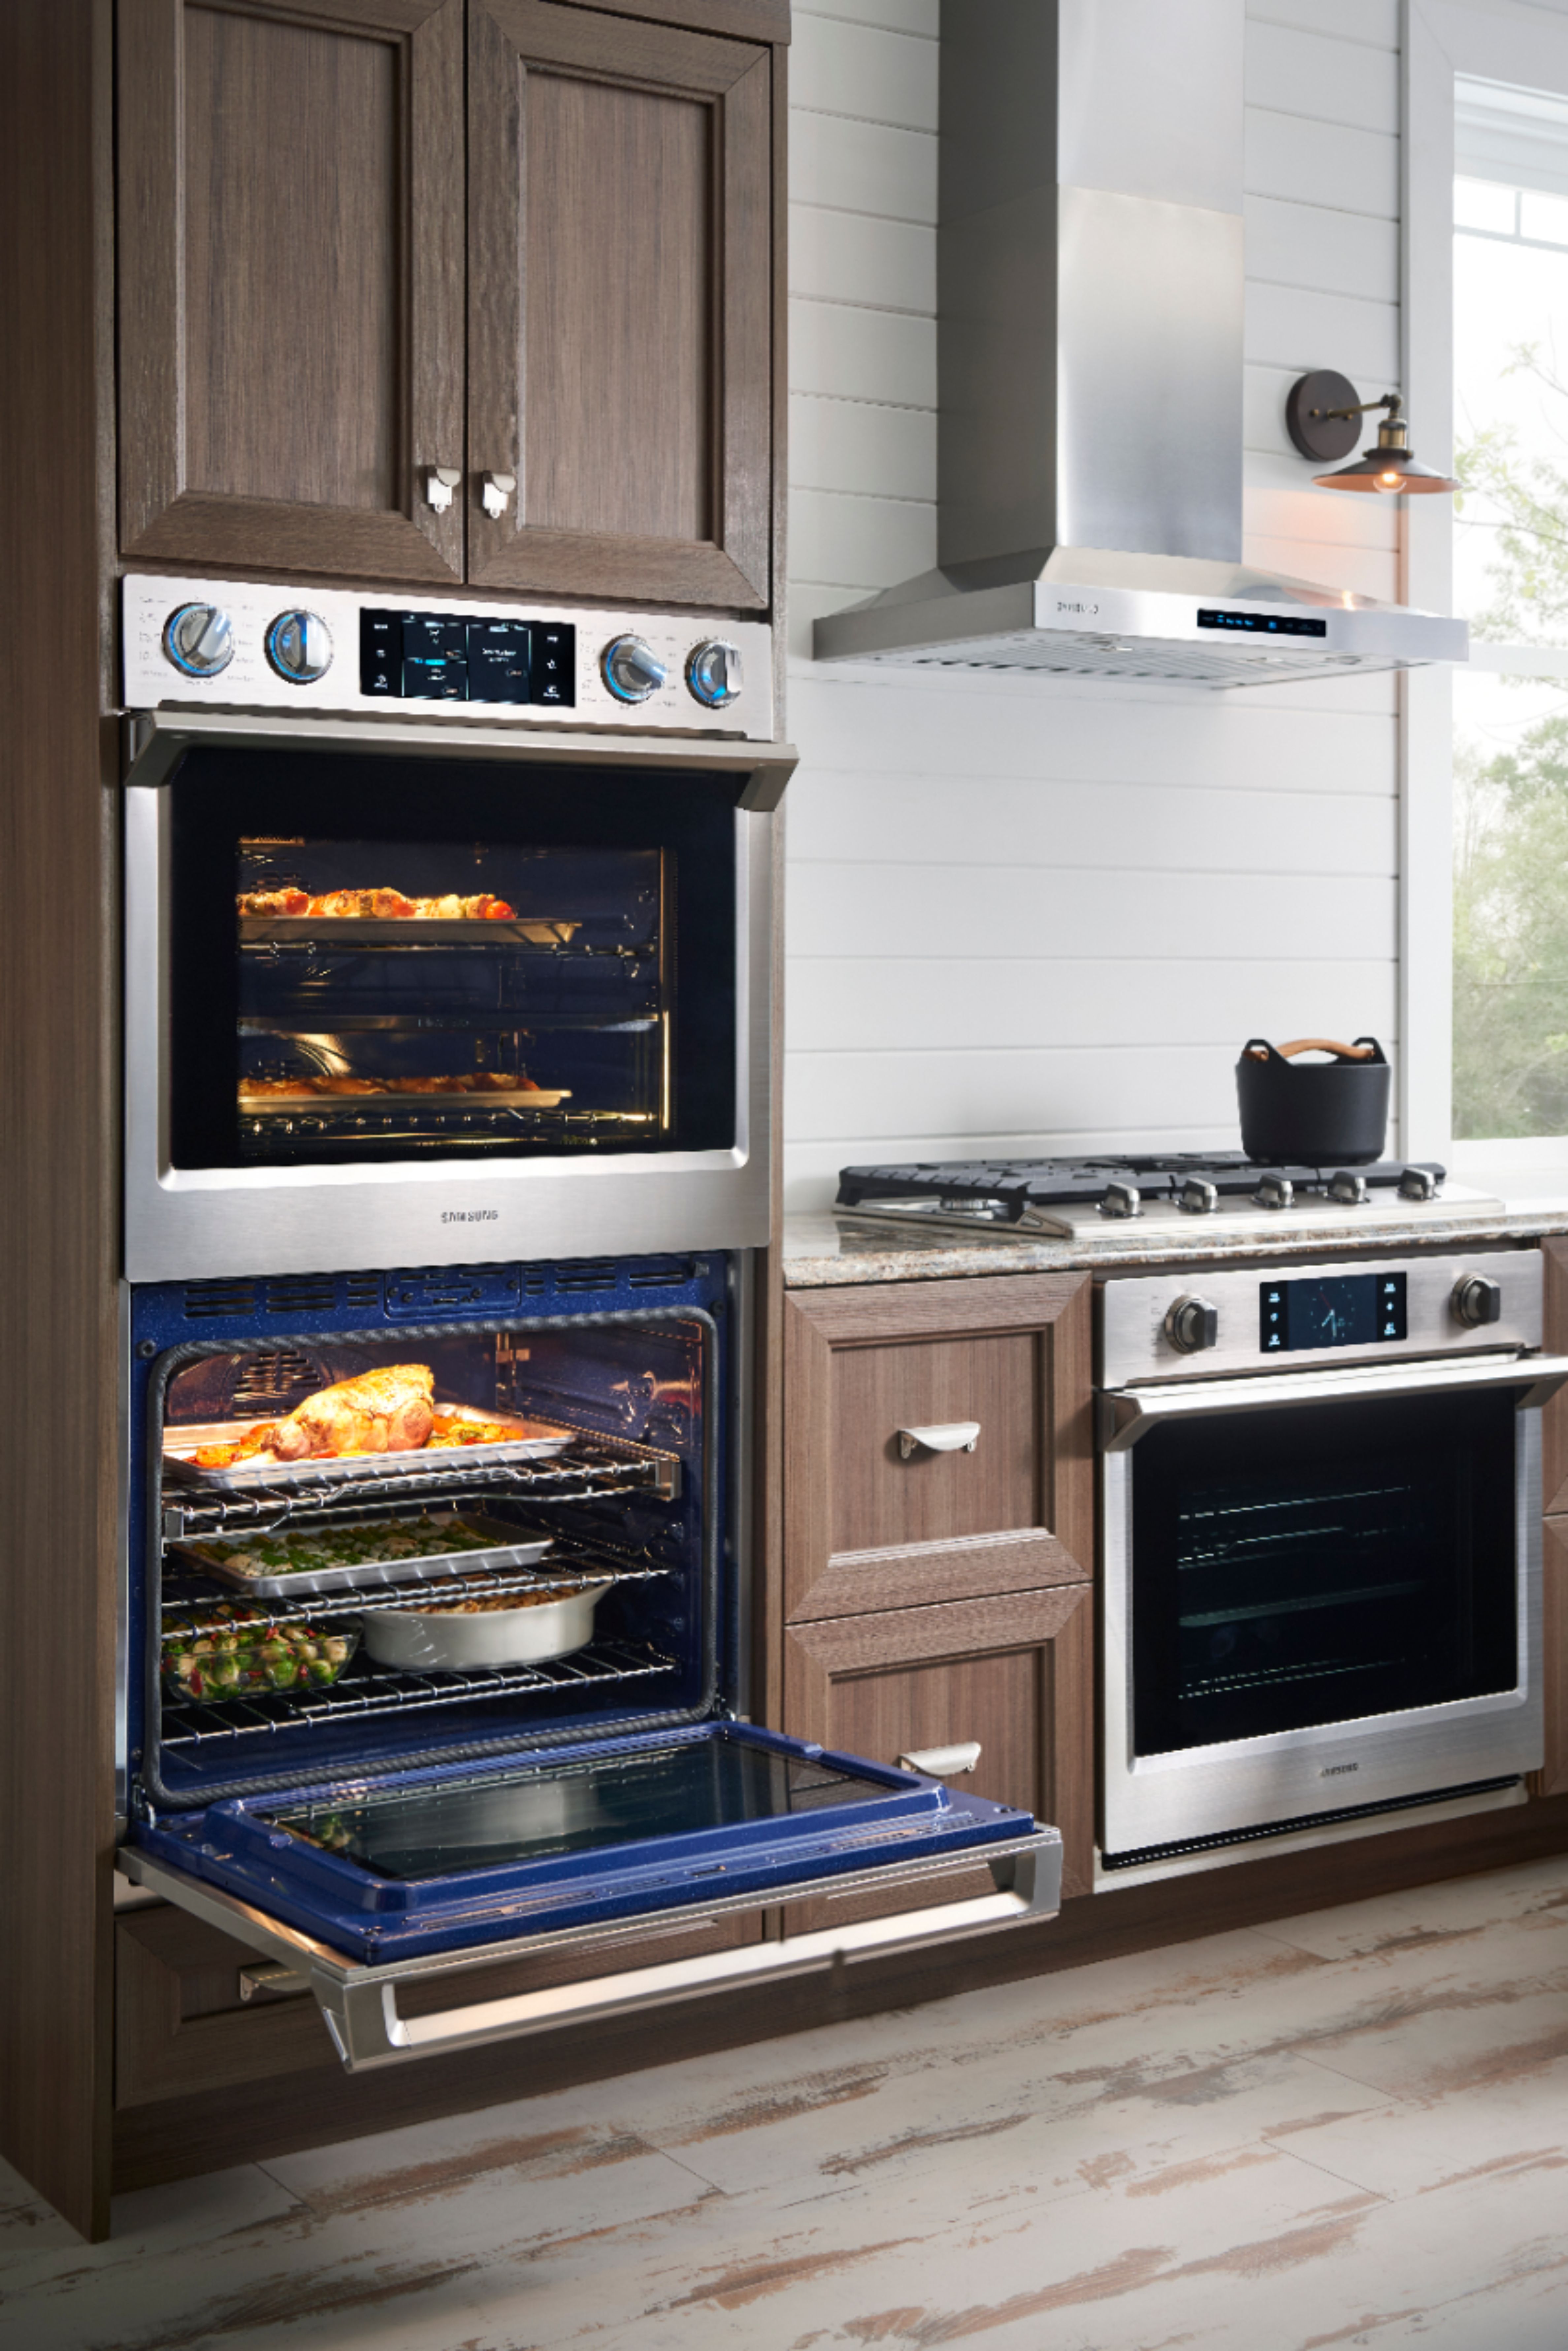 Samsung Steam Cook with Flex Duo 30-in Single Electric Wall Oven